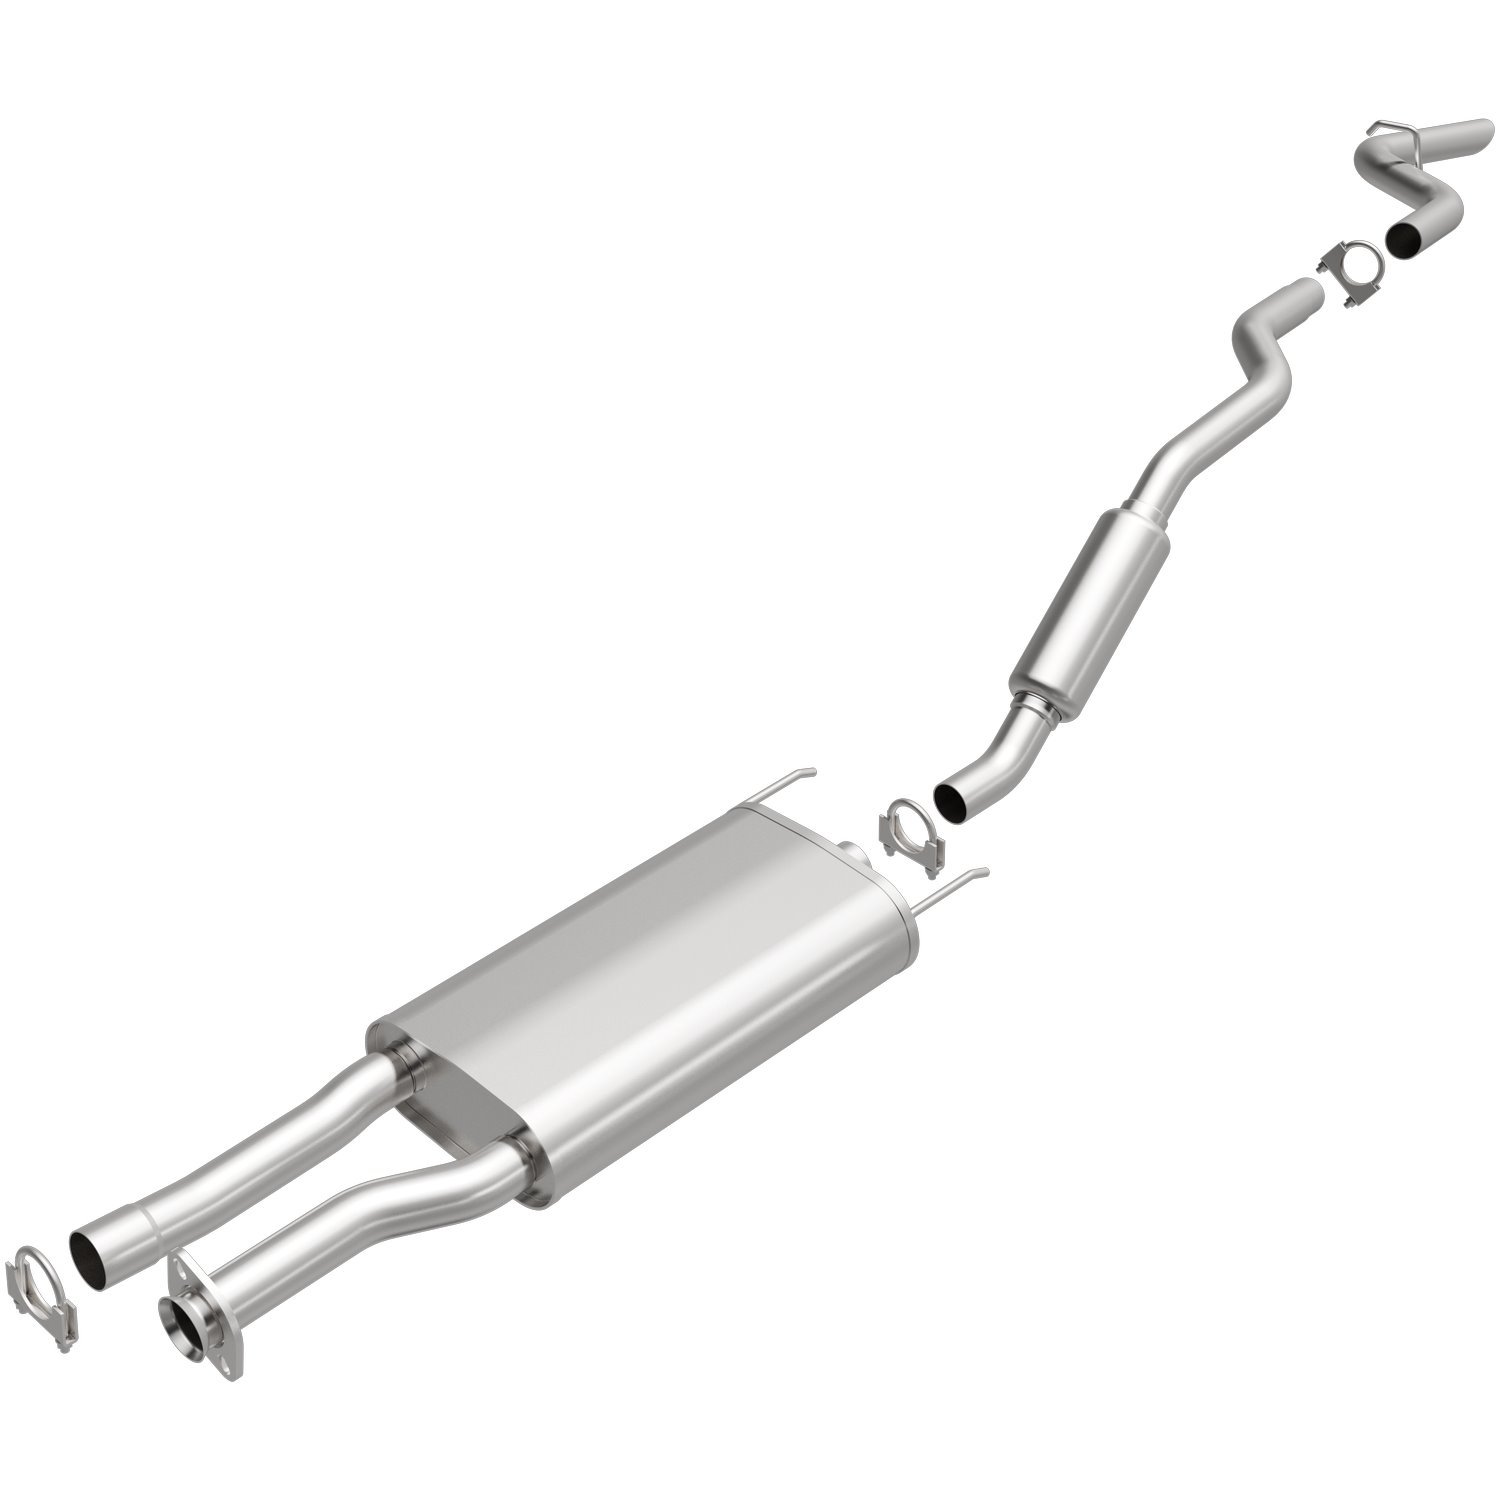 Direct-Fit Exhaust Kit, Ford Explorer, Mercury Mountaineer 4.0L